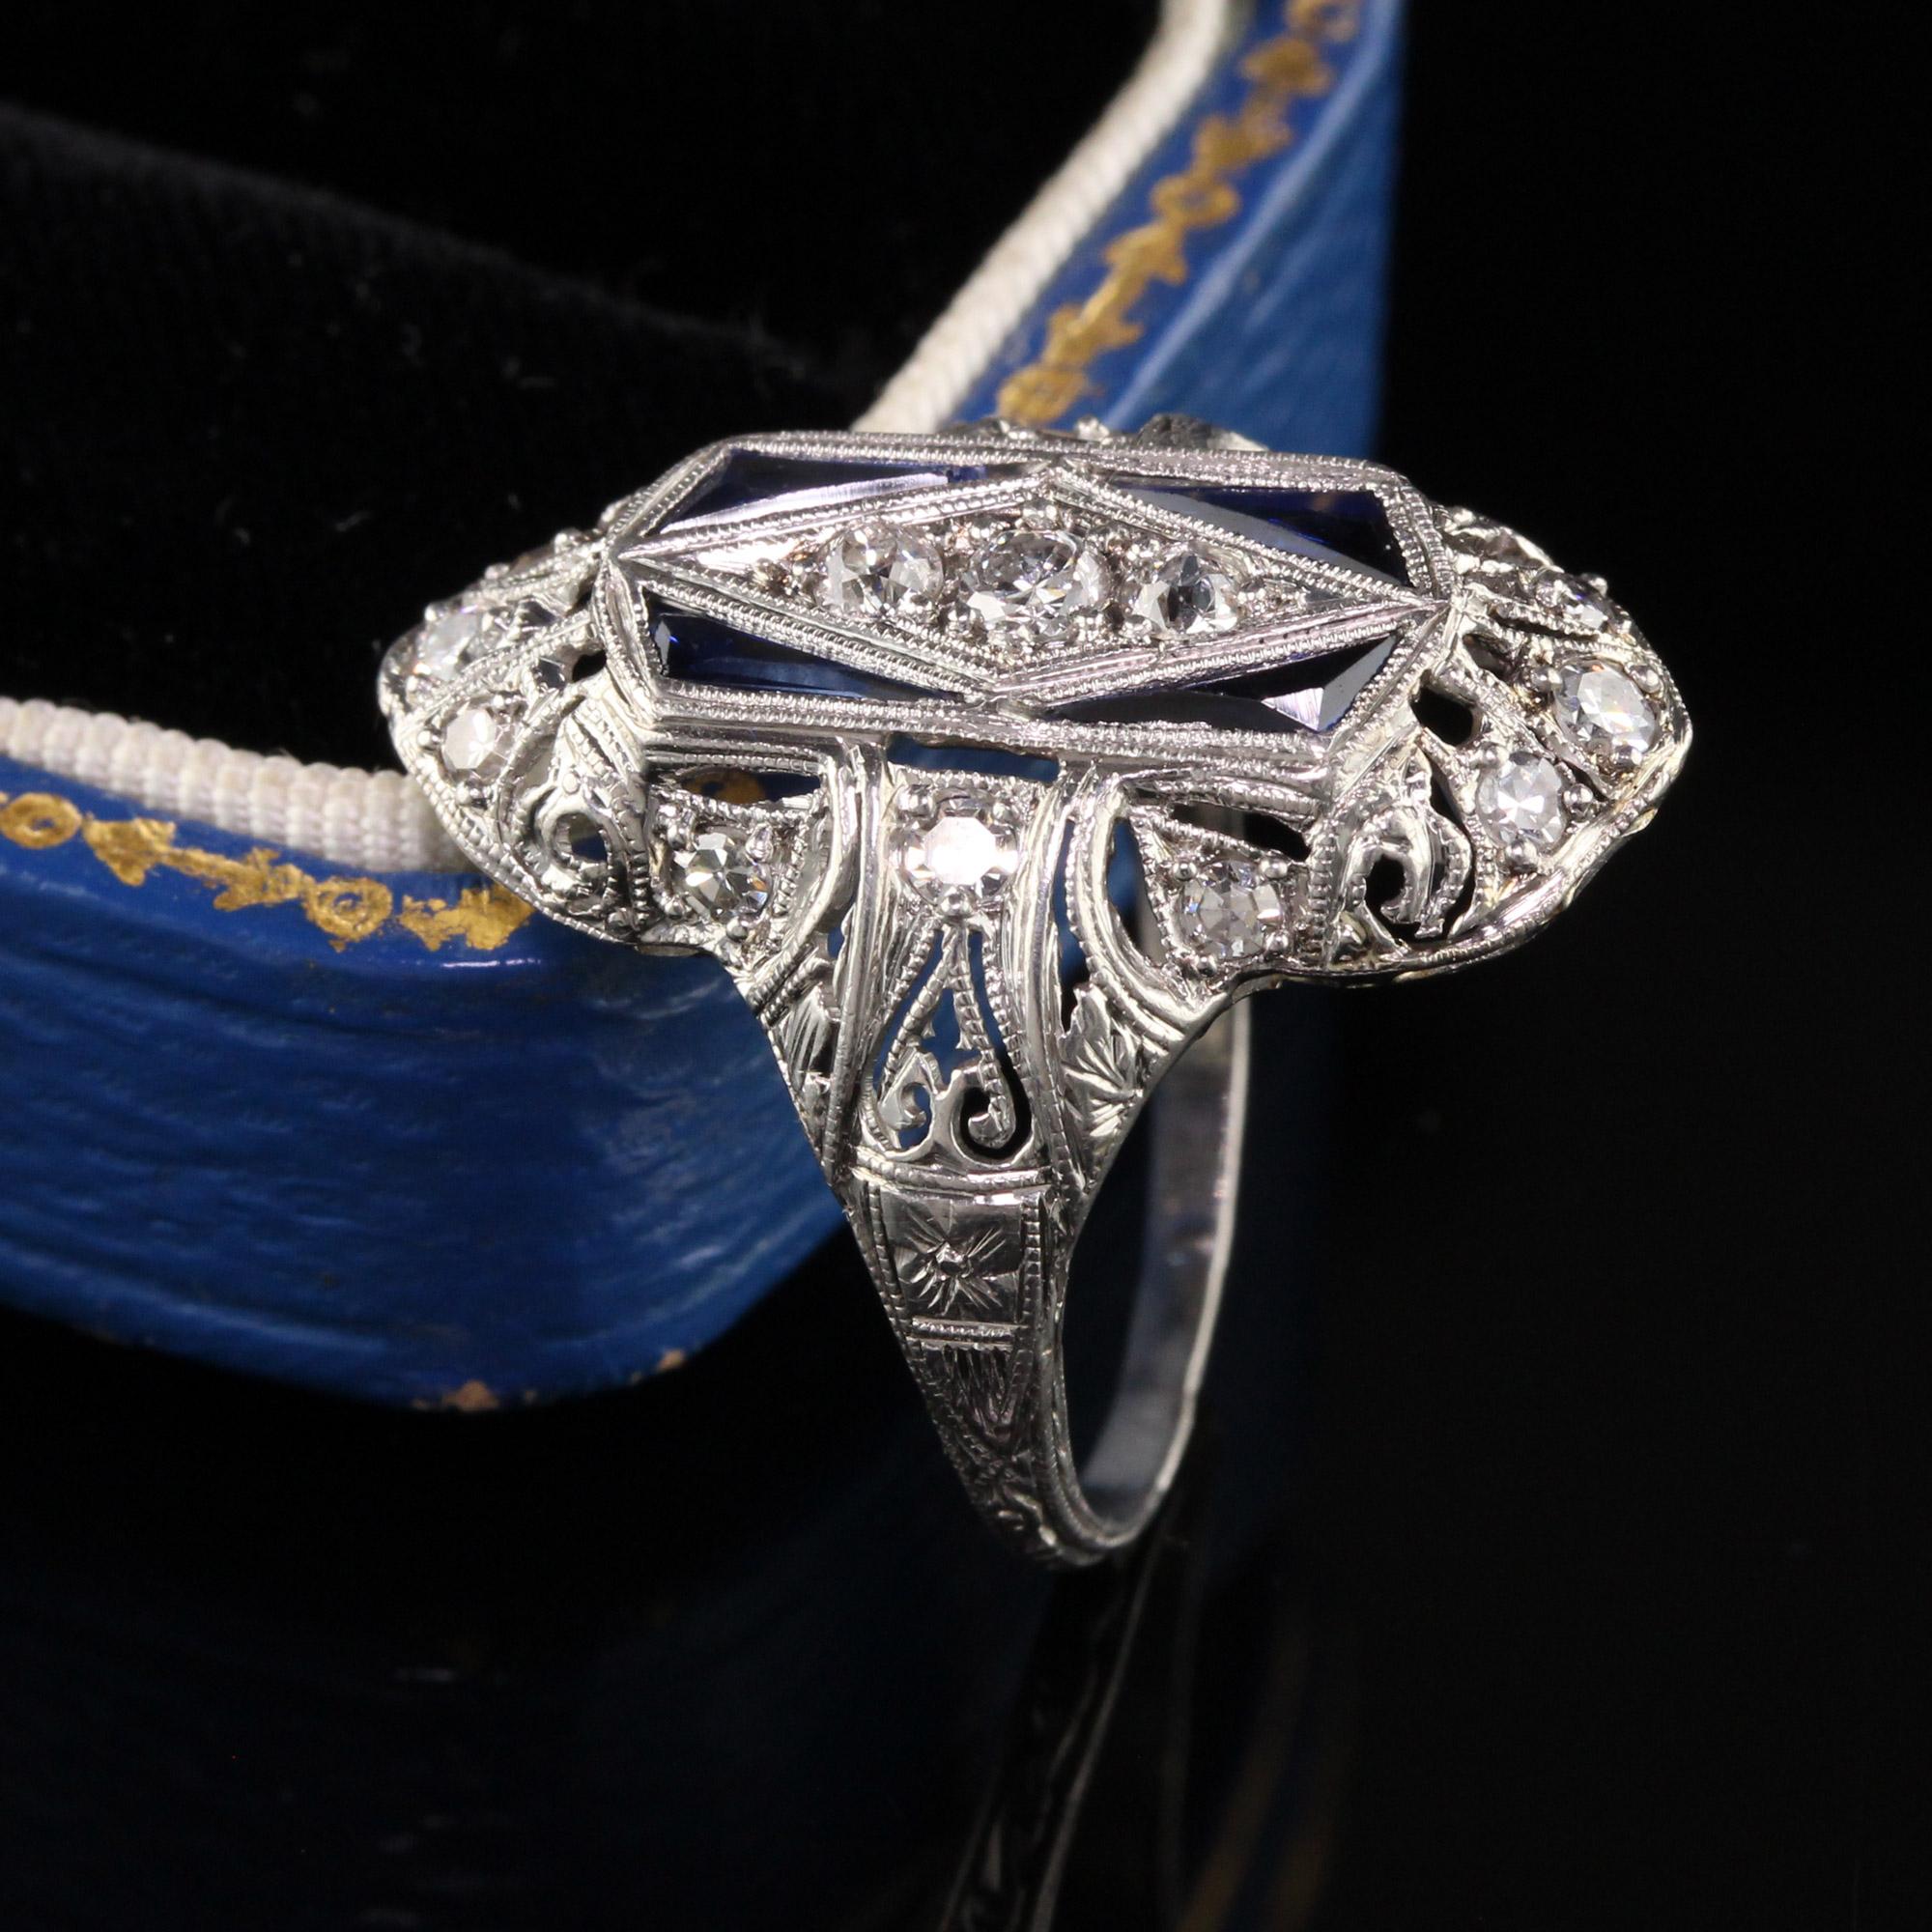 Beautiful Antique Art Deco Platinum Old Mine Diamond Shield Ring. This beautiful ring has old mine cut diamonds and single cut diamonds on the ring with 4 kite shaped synthetic sapphires. The filigree and engravings on the ring are in great